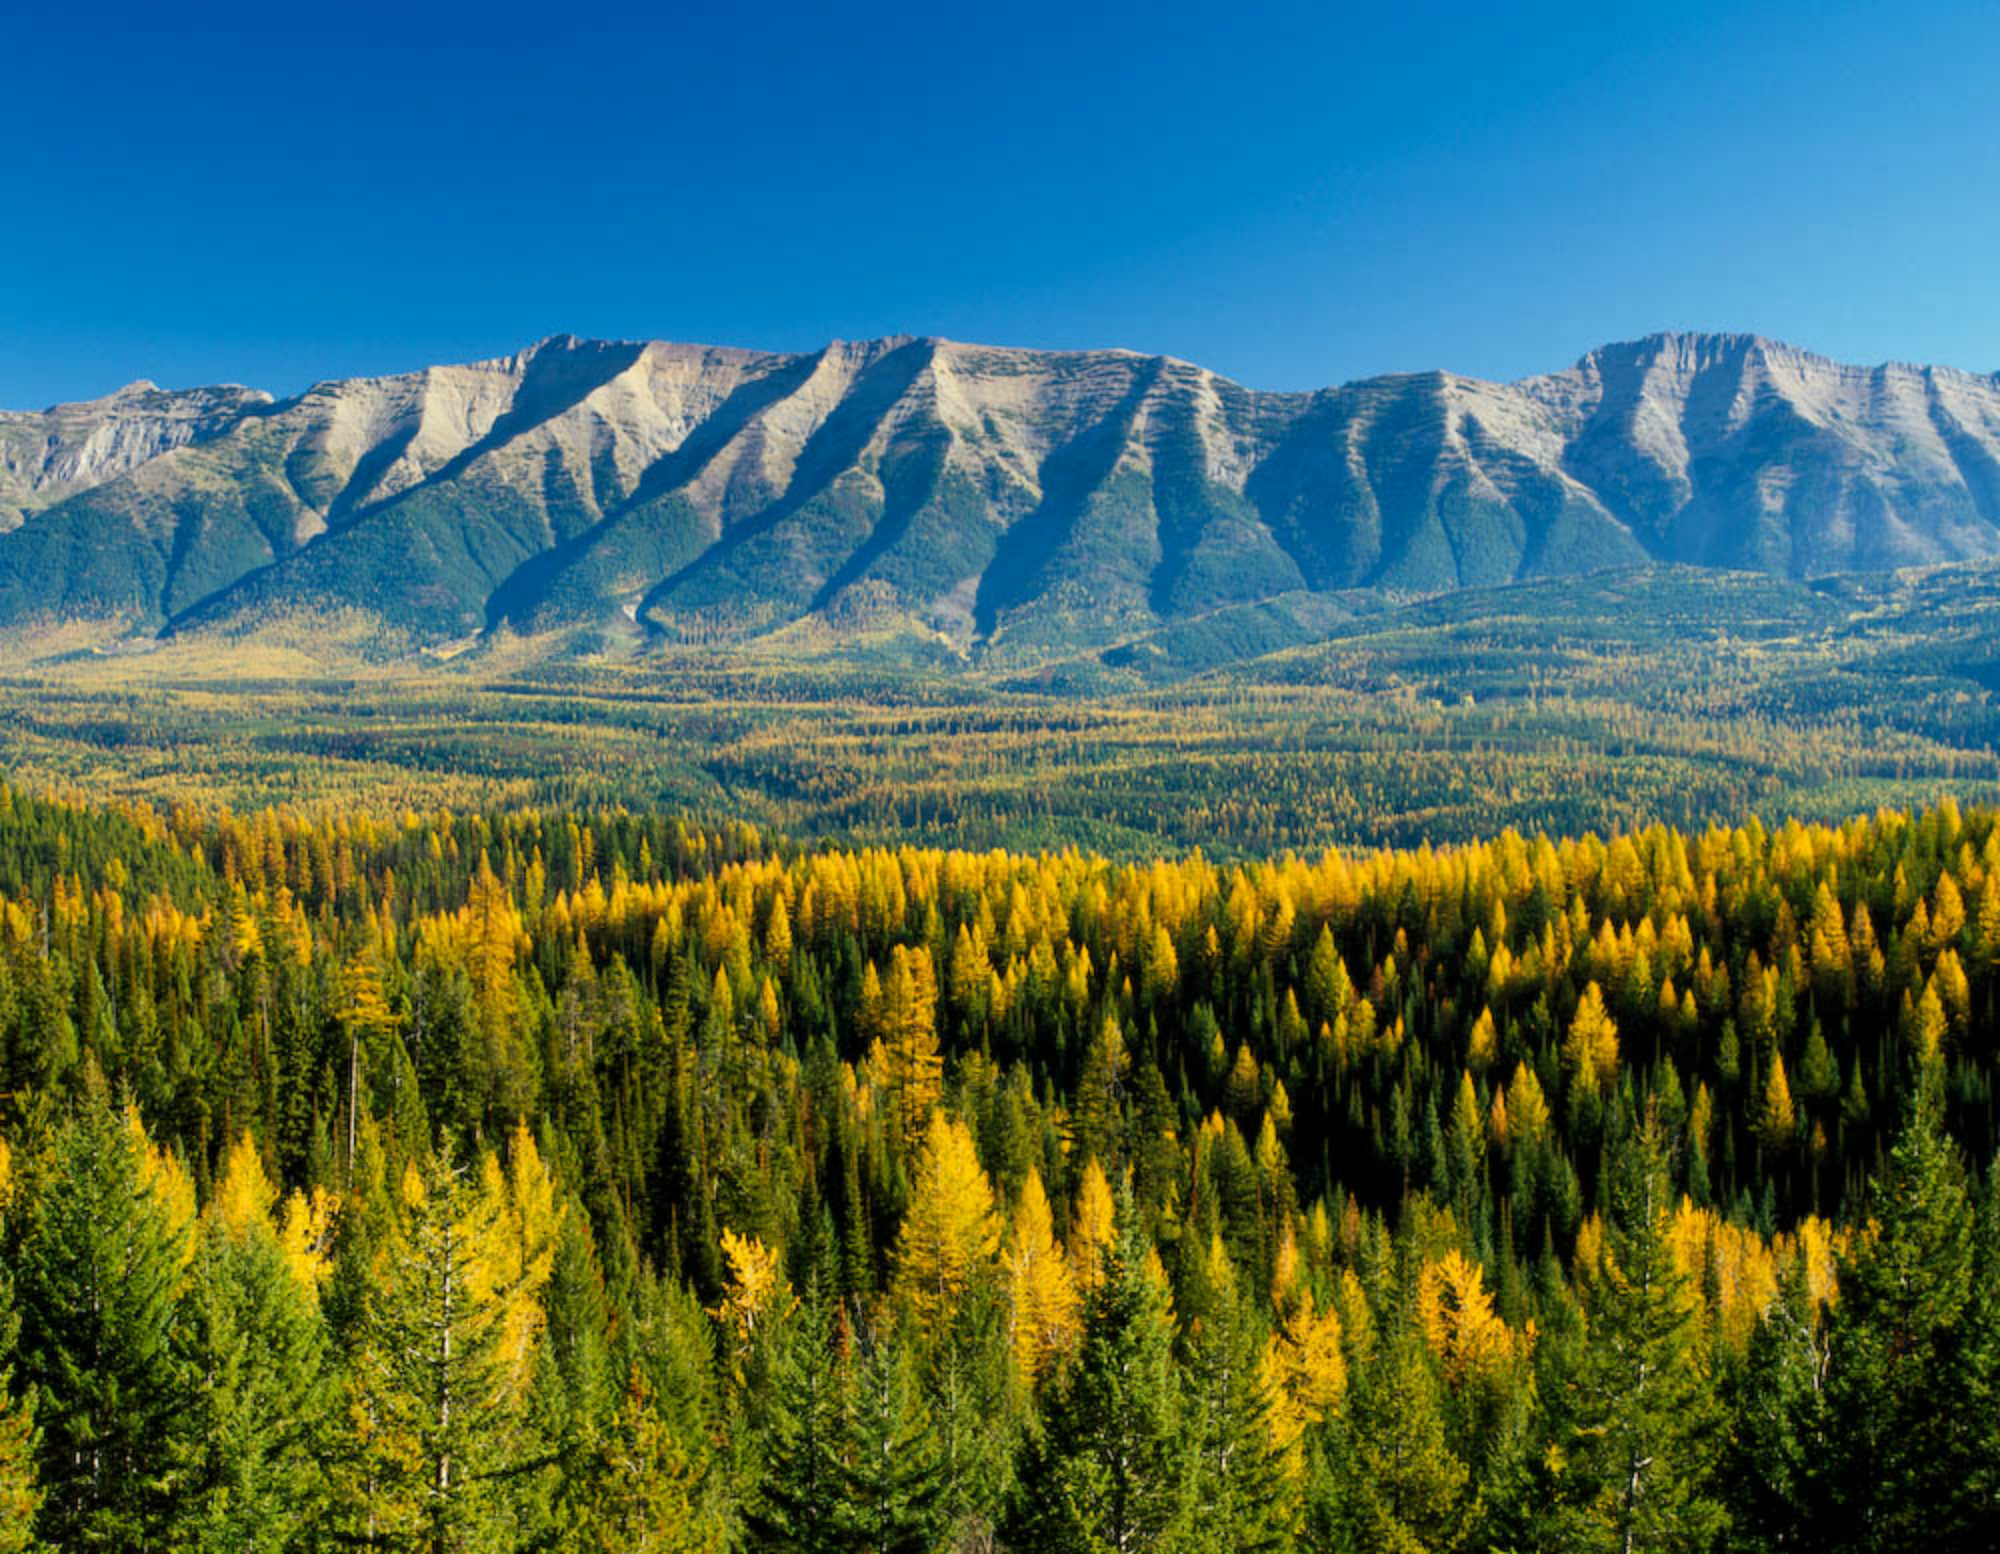 Larch trees turn yellow in a heavily forested valley beneath the Swan Mountains.